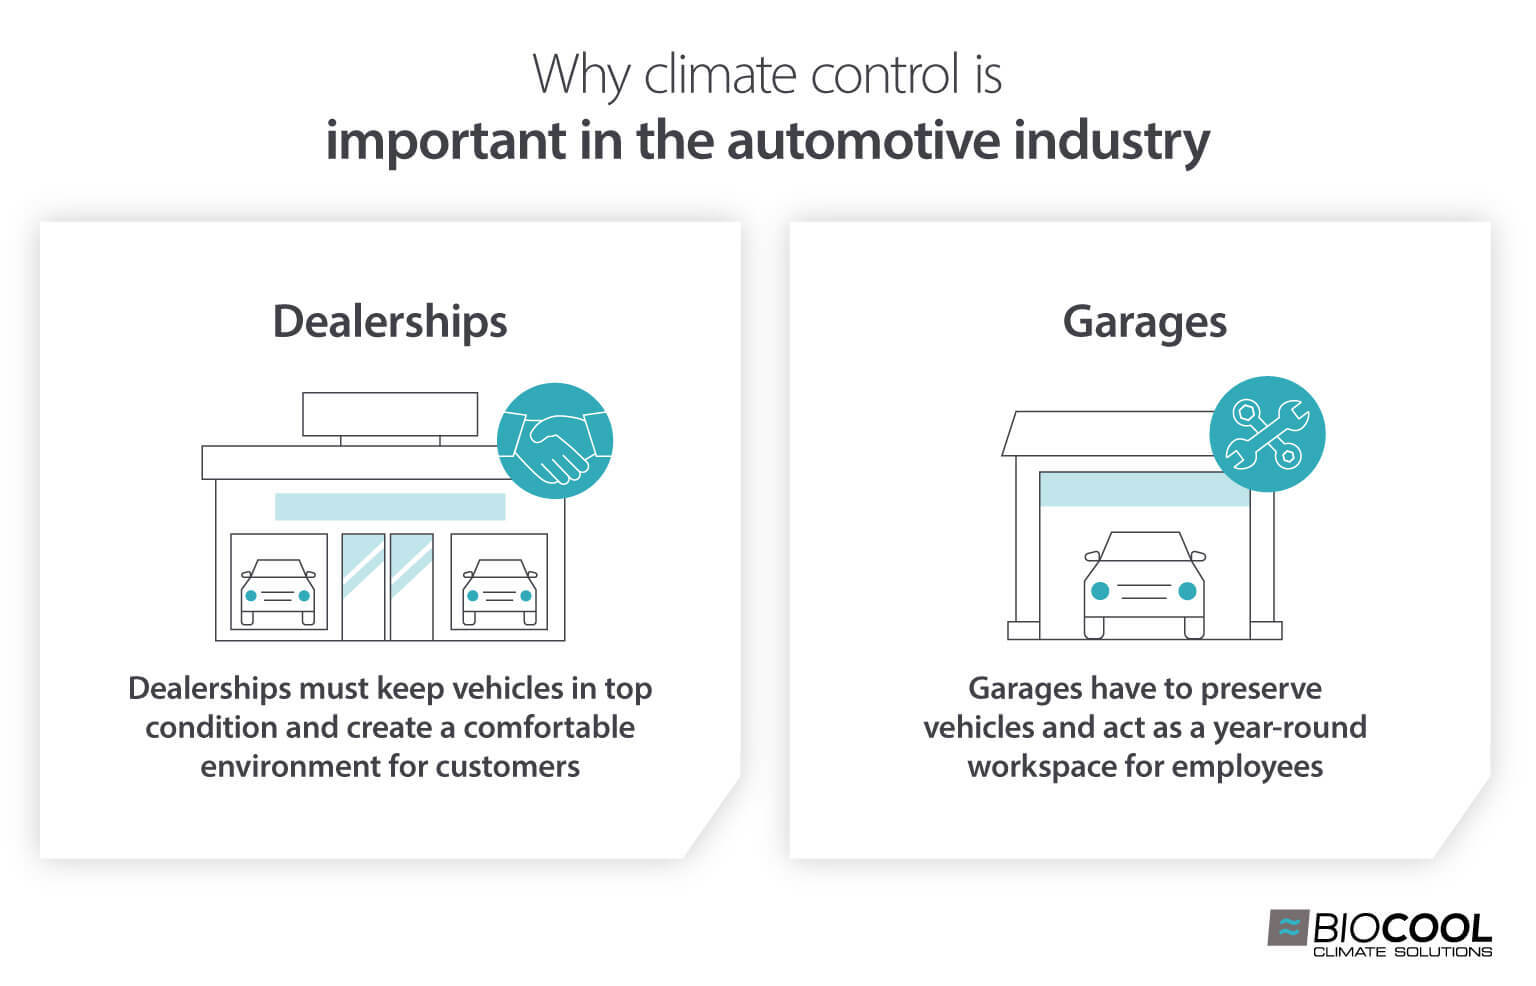 Why climate control is important in the automotive industry - Infographic image